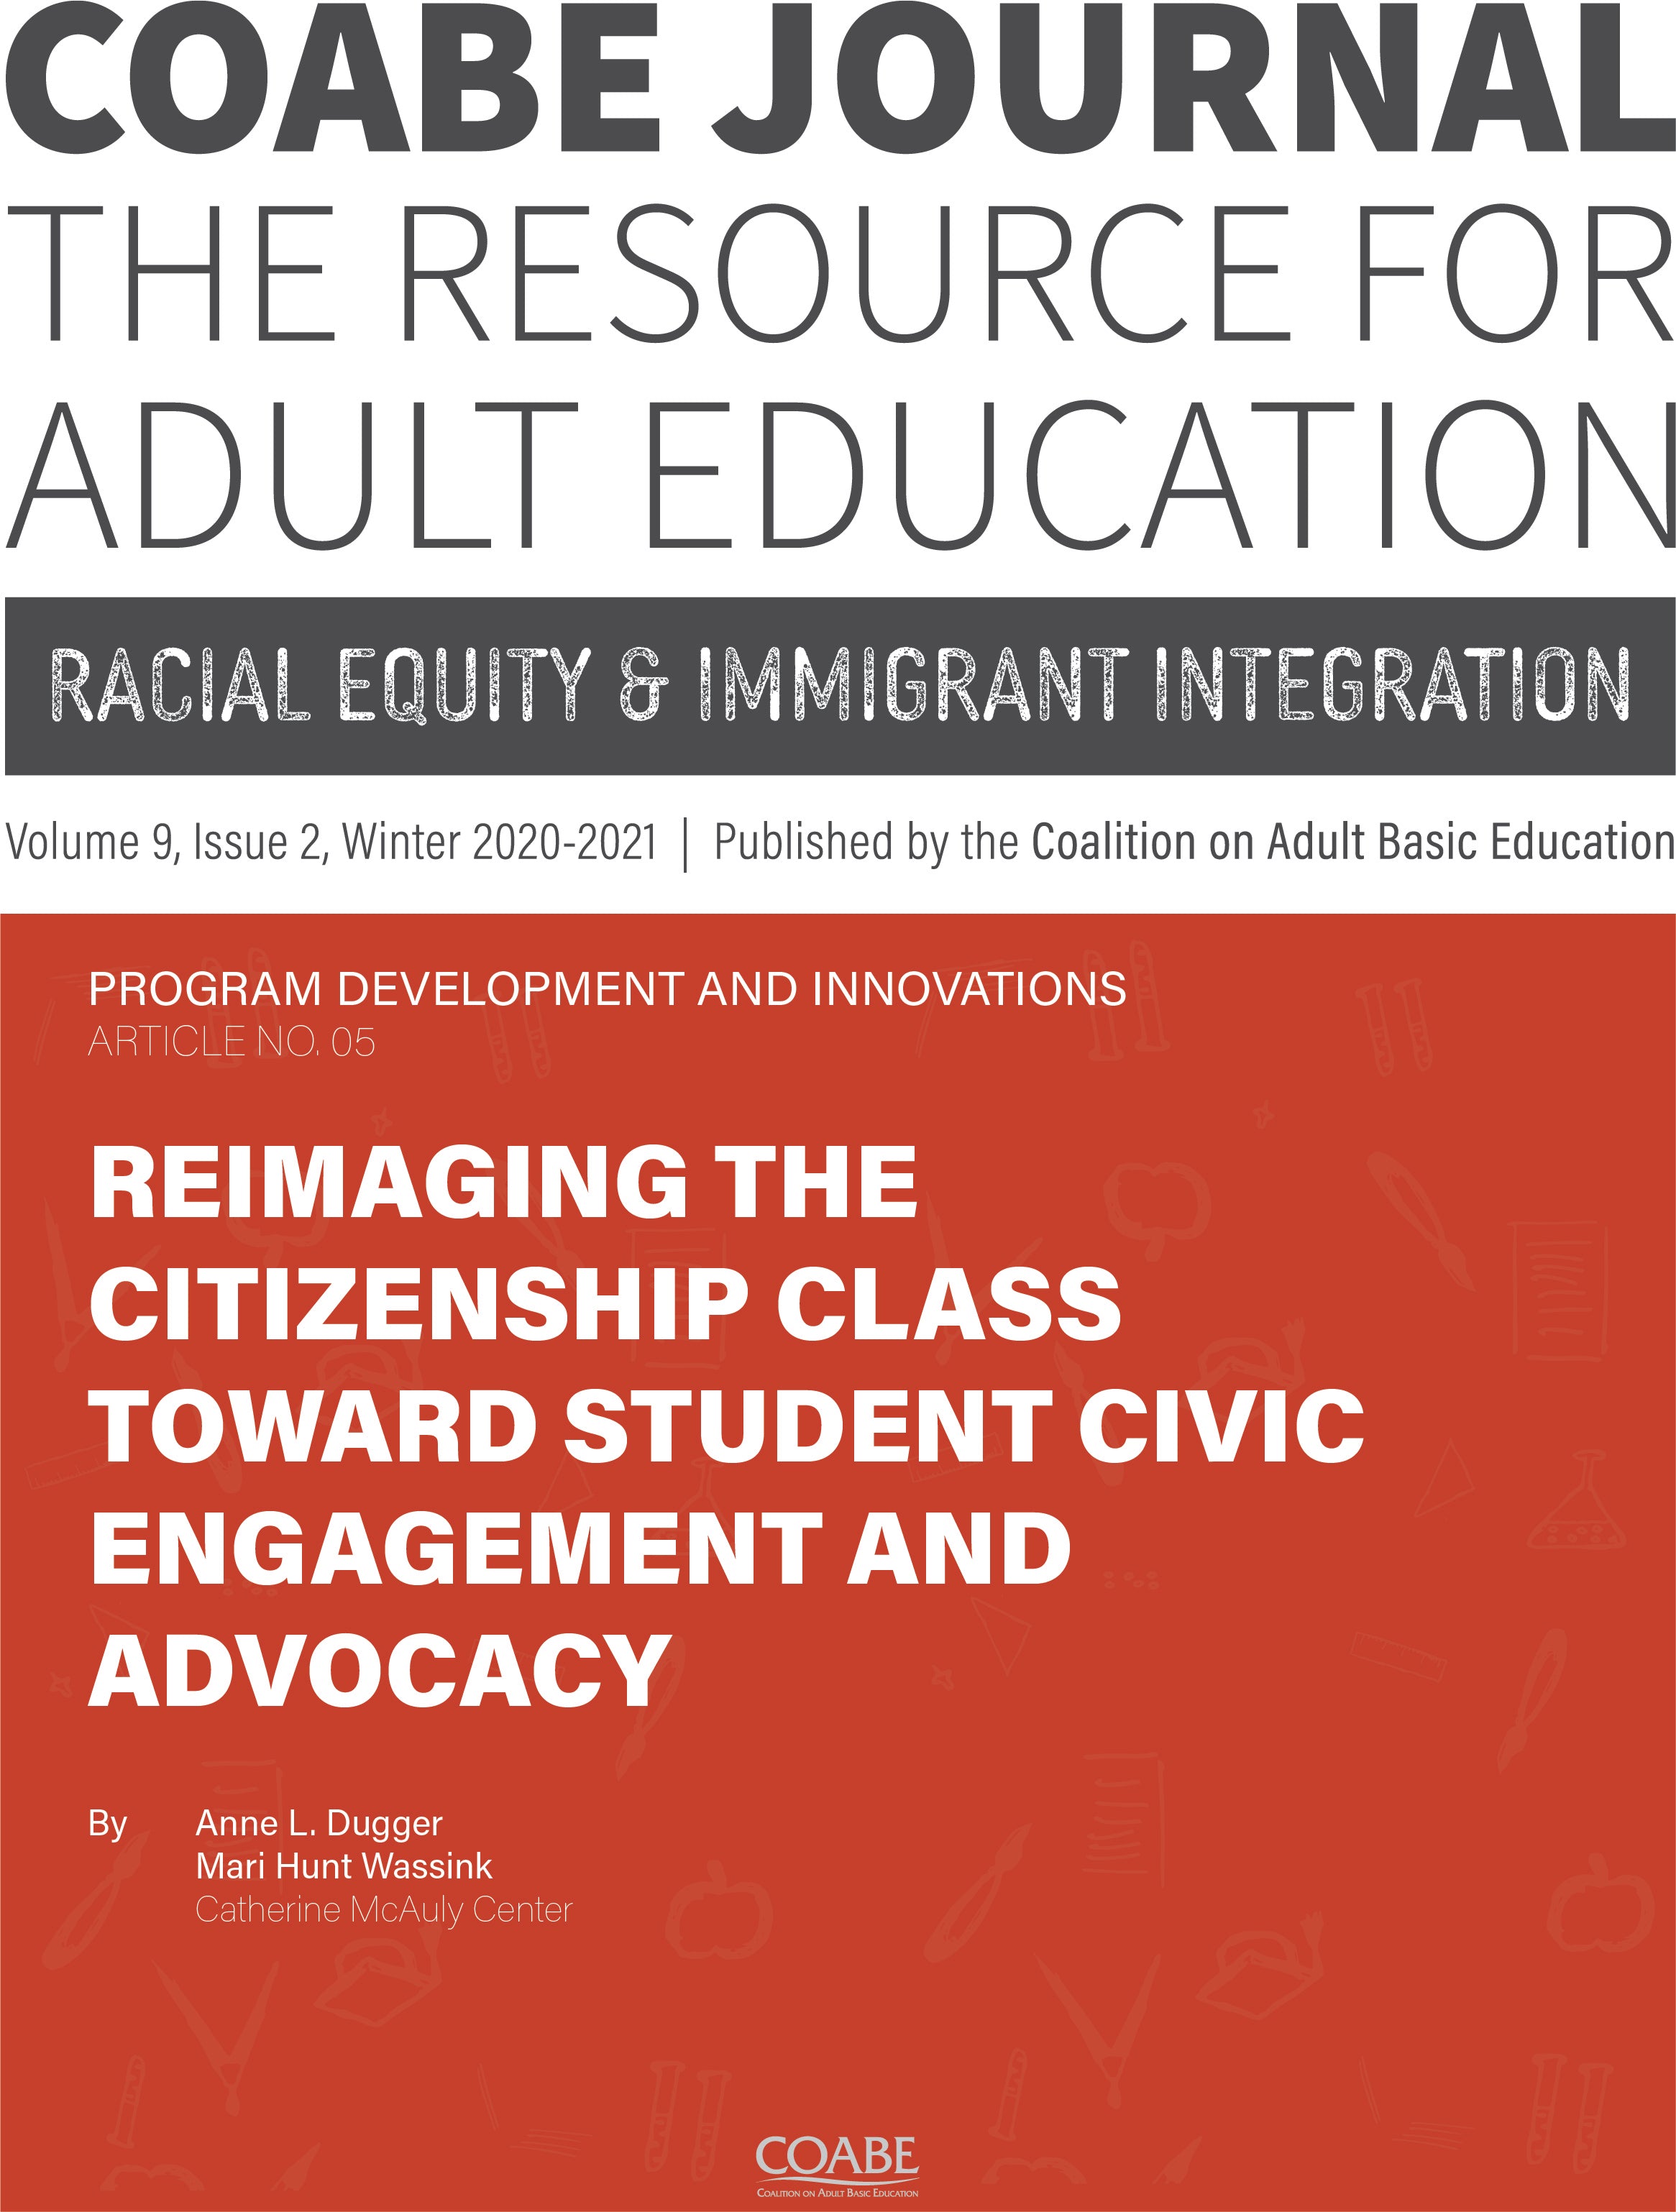 Article 05 / Reimaging the Citizenship Class Toward Student Civic Engagement and Advocacy